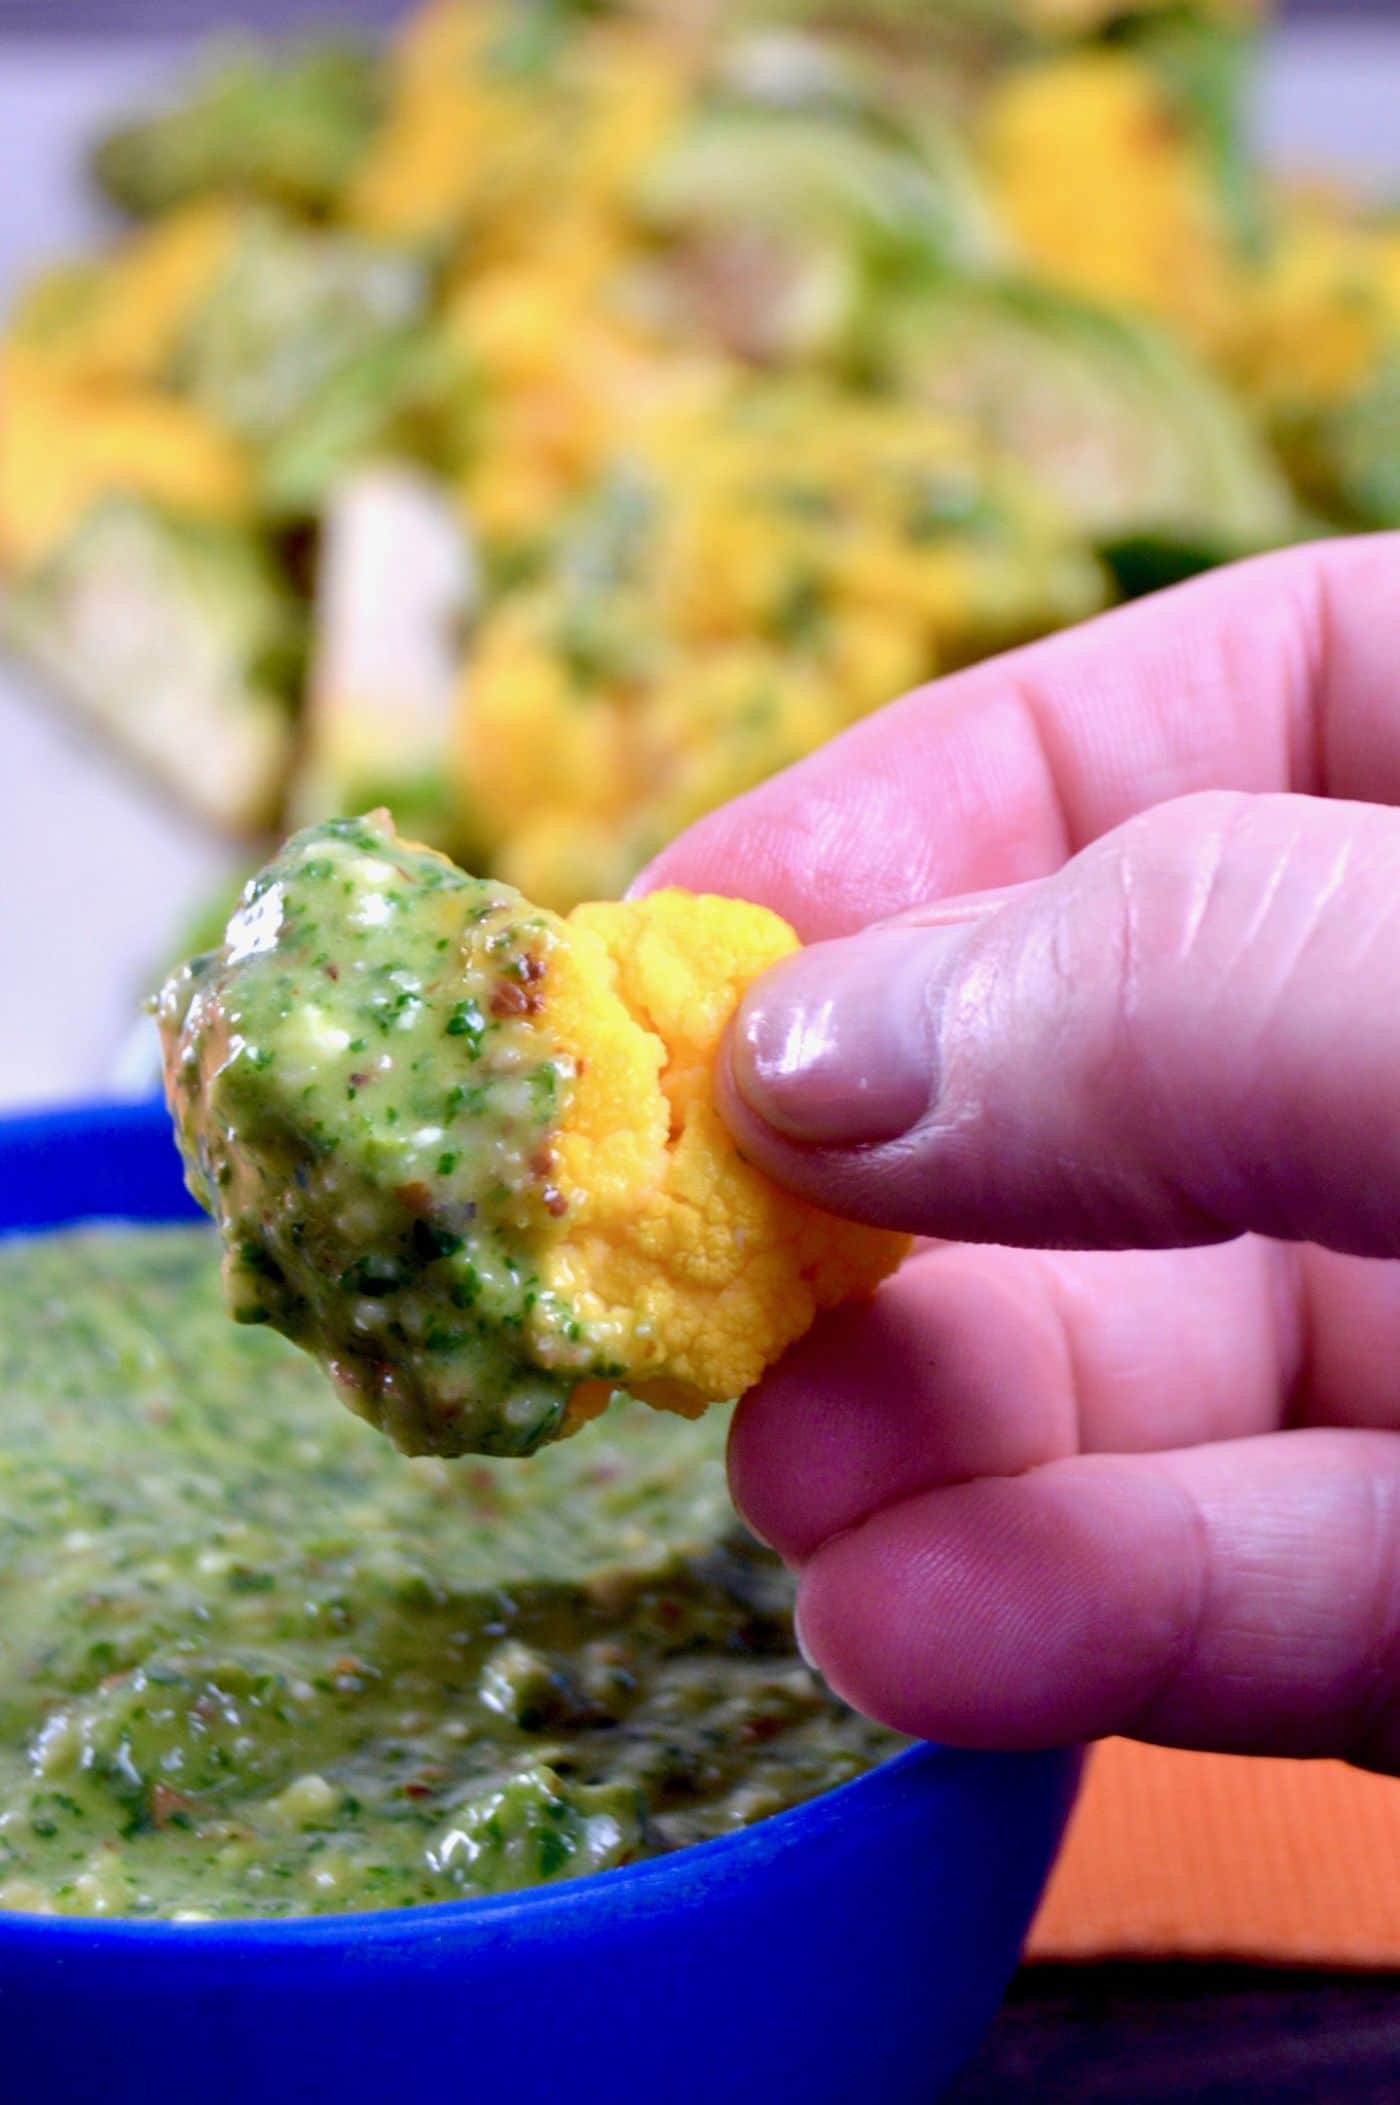 Creamy Salsa Verde Pistou to make in 10 minutes to use as a dipping sauce for veggies.